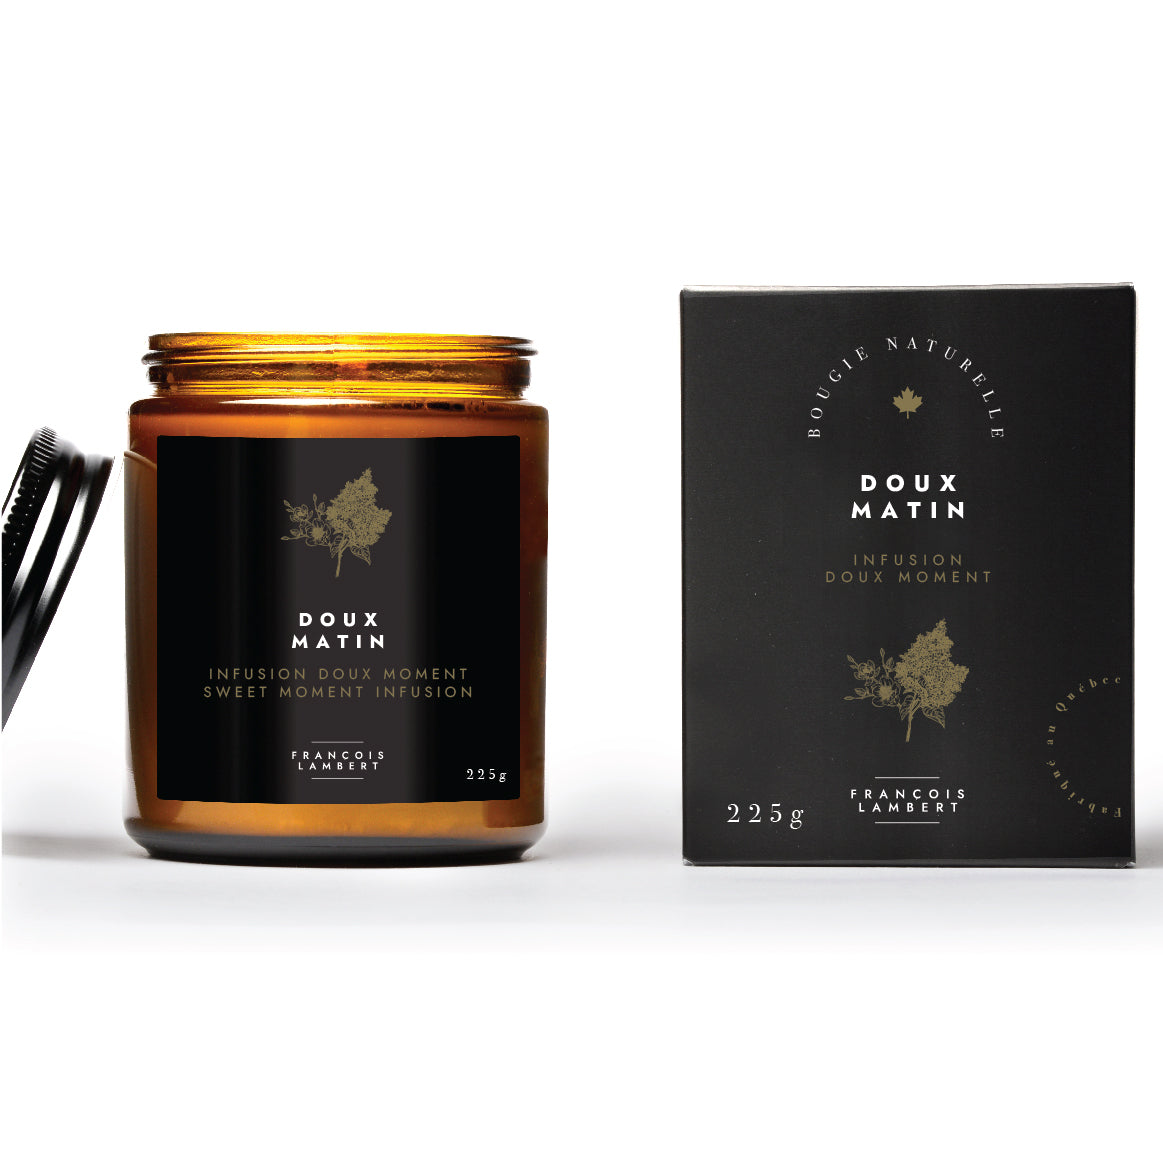 No.34 Doux matin - Soy candle, Sweet moment infusion